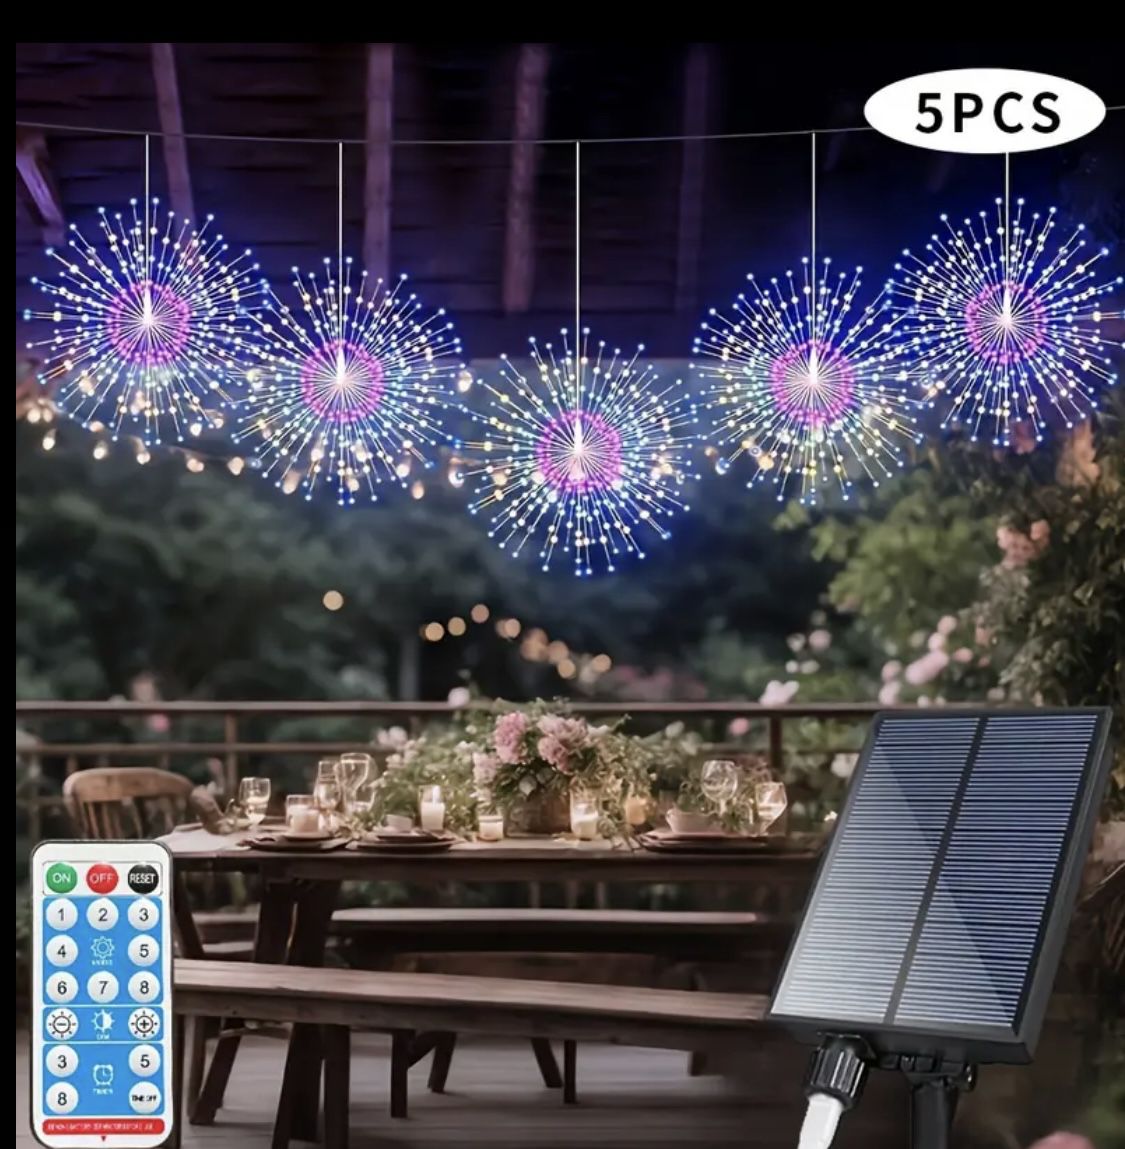 5pes solar fireworks Lights Remote Control Timer 8 Modes, waterproof good for 4th of July ,summer